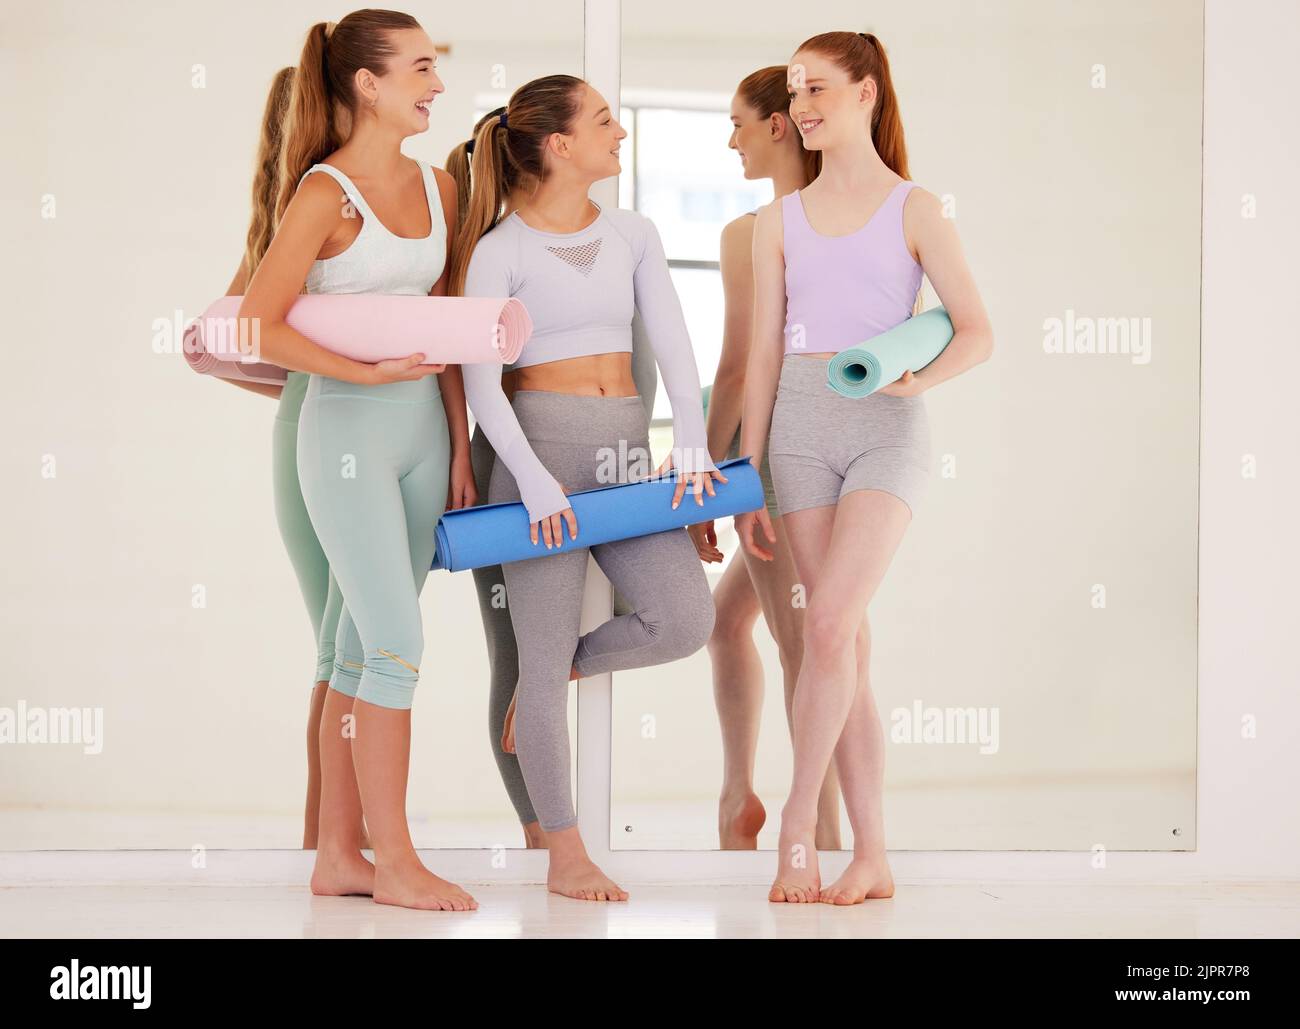 Yoga, fitness and exercise with a group of young women training for health, wellness and an active lifestyle. Friends, sports people and healthy girls Stock Photo